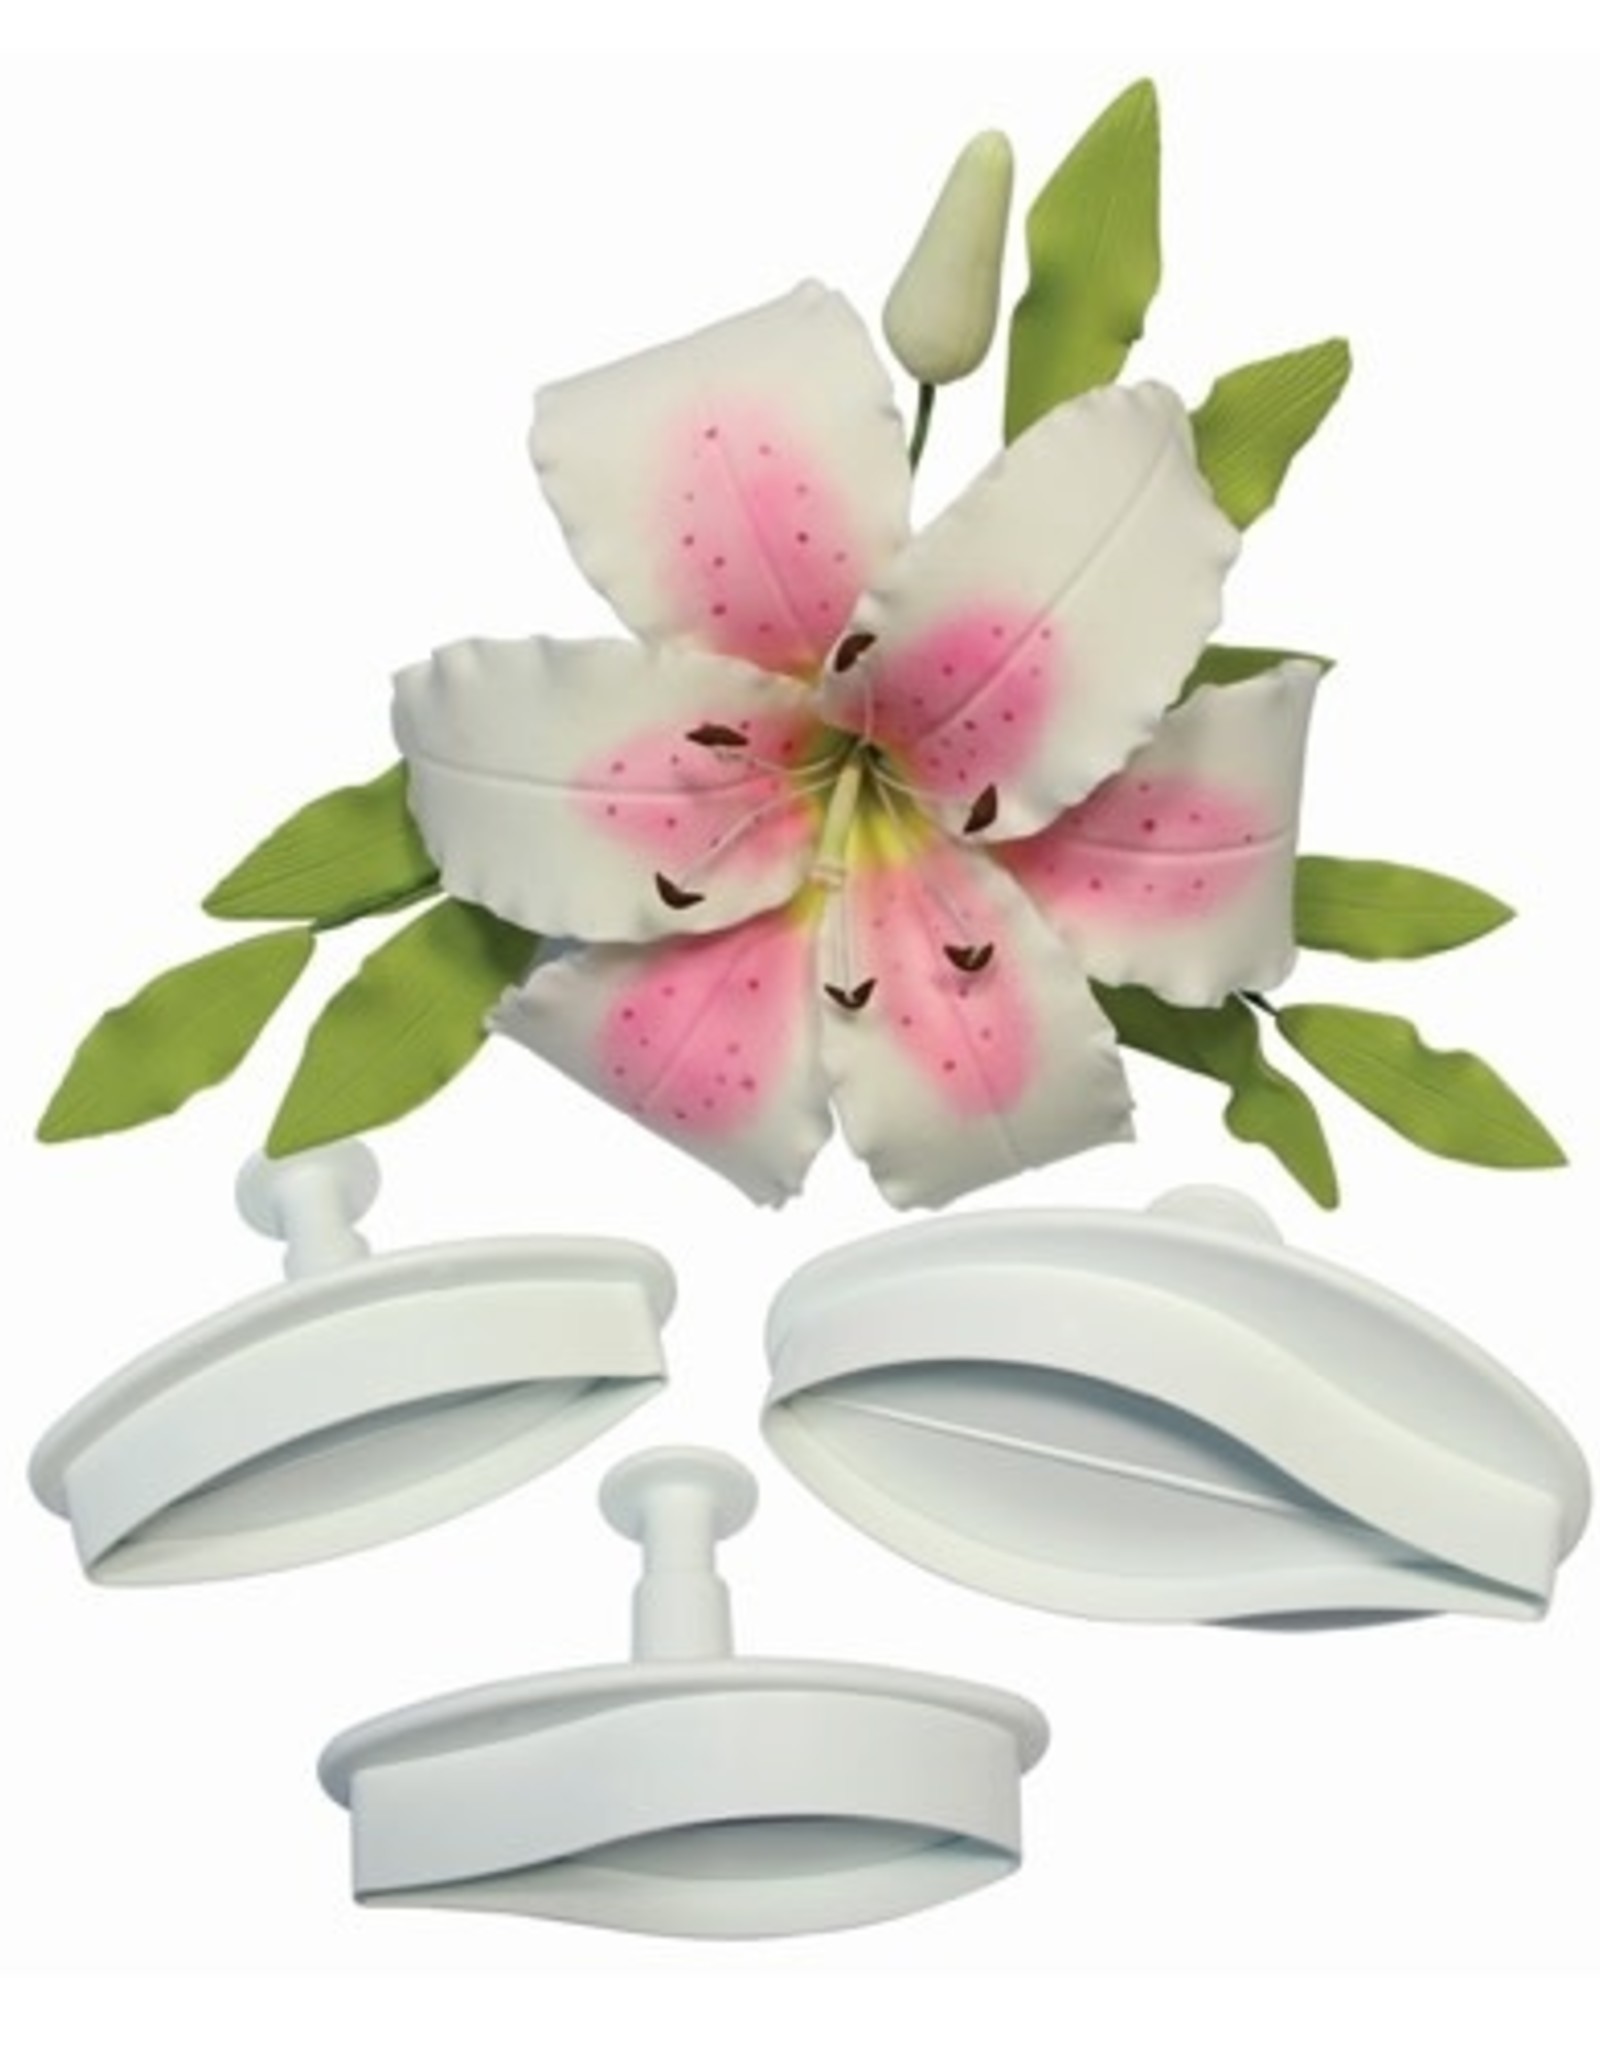 PME PME Lily Plunger Cutter set SMALL set/2